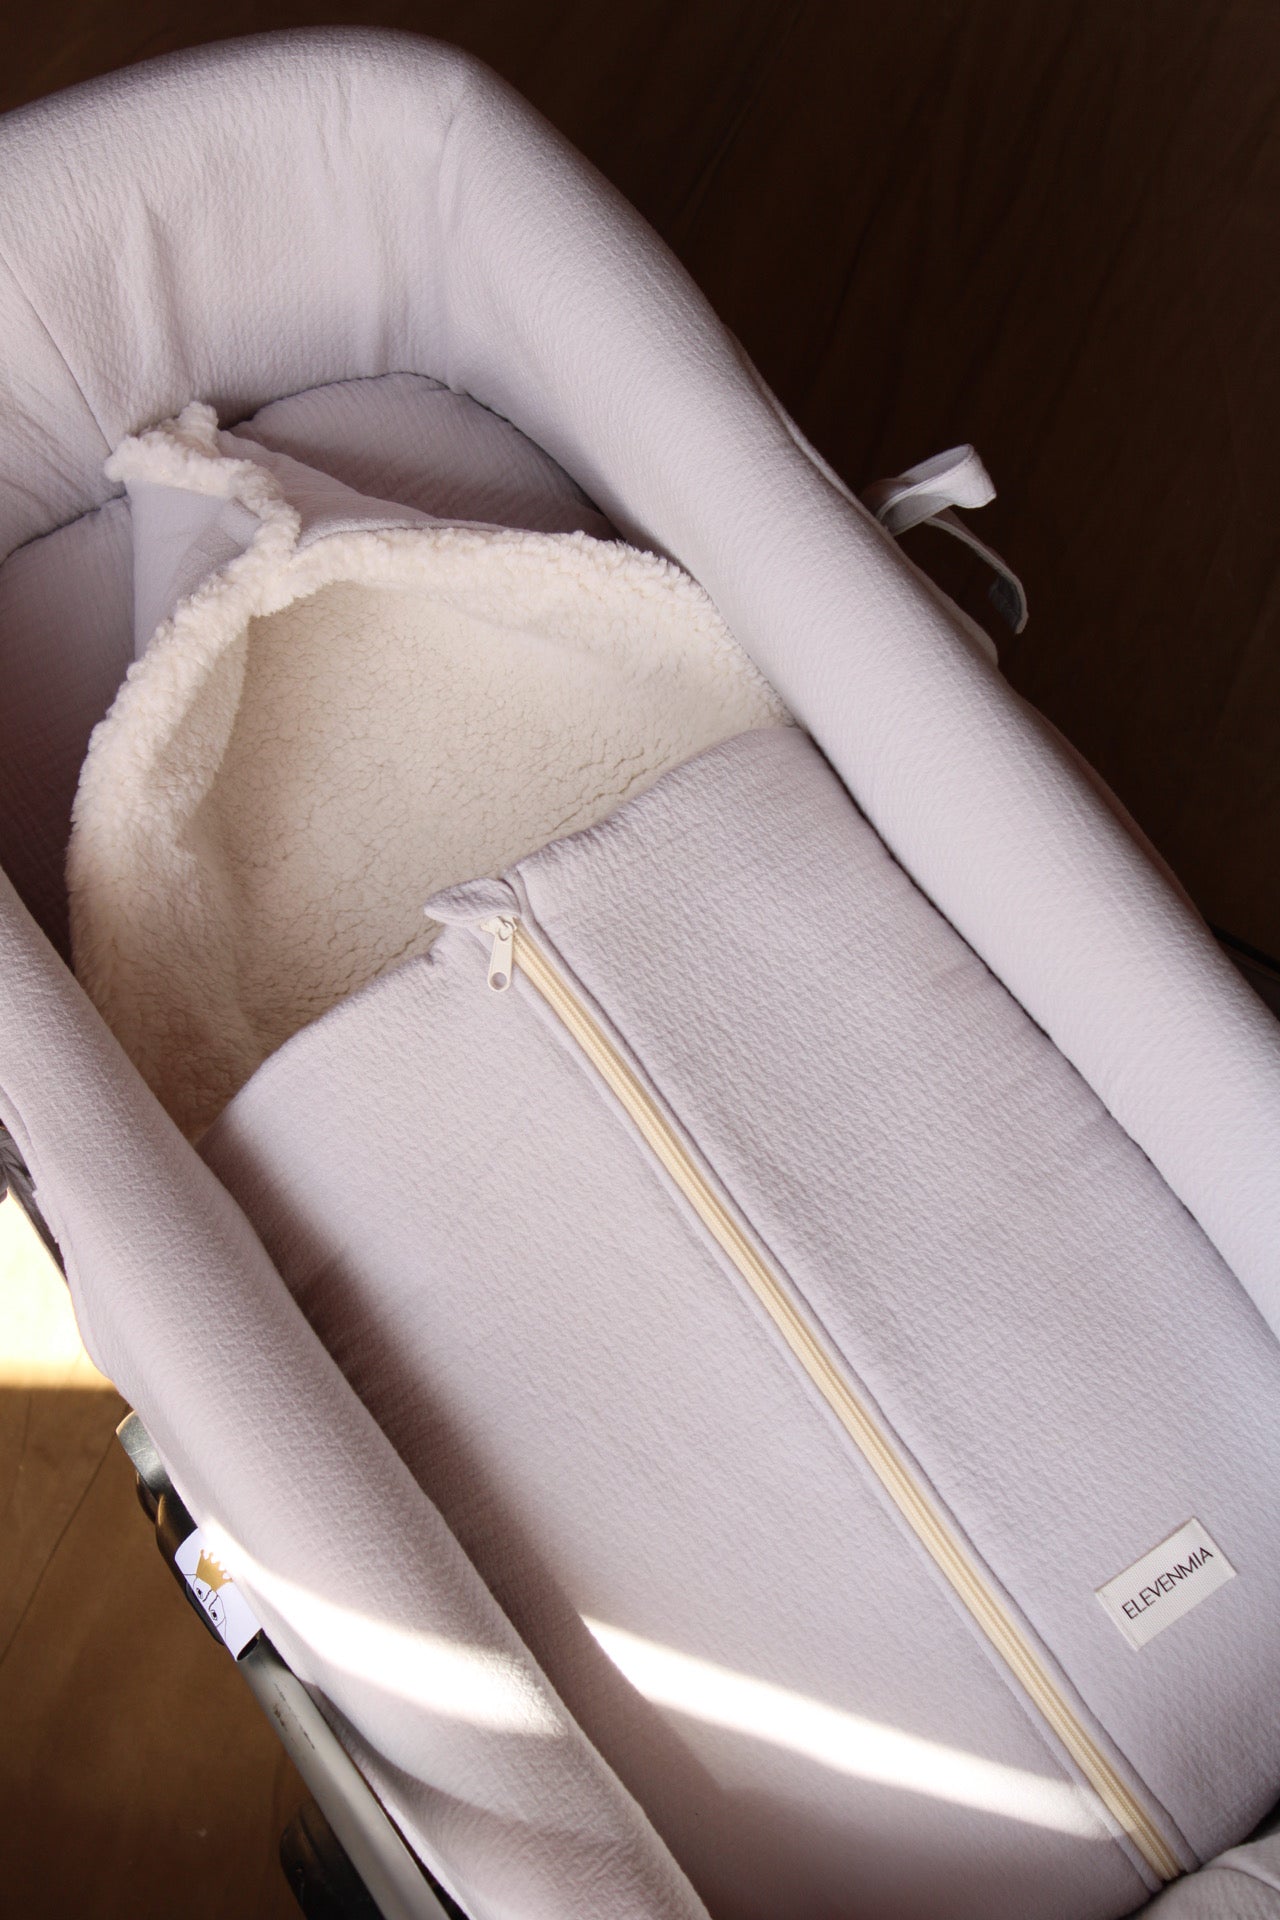 Carrycot Cover Classic Vichy + Beige Muslin